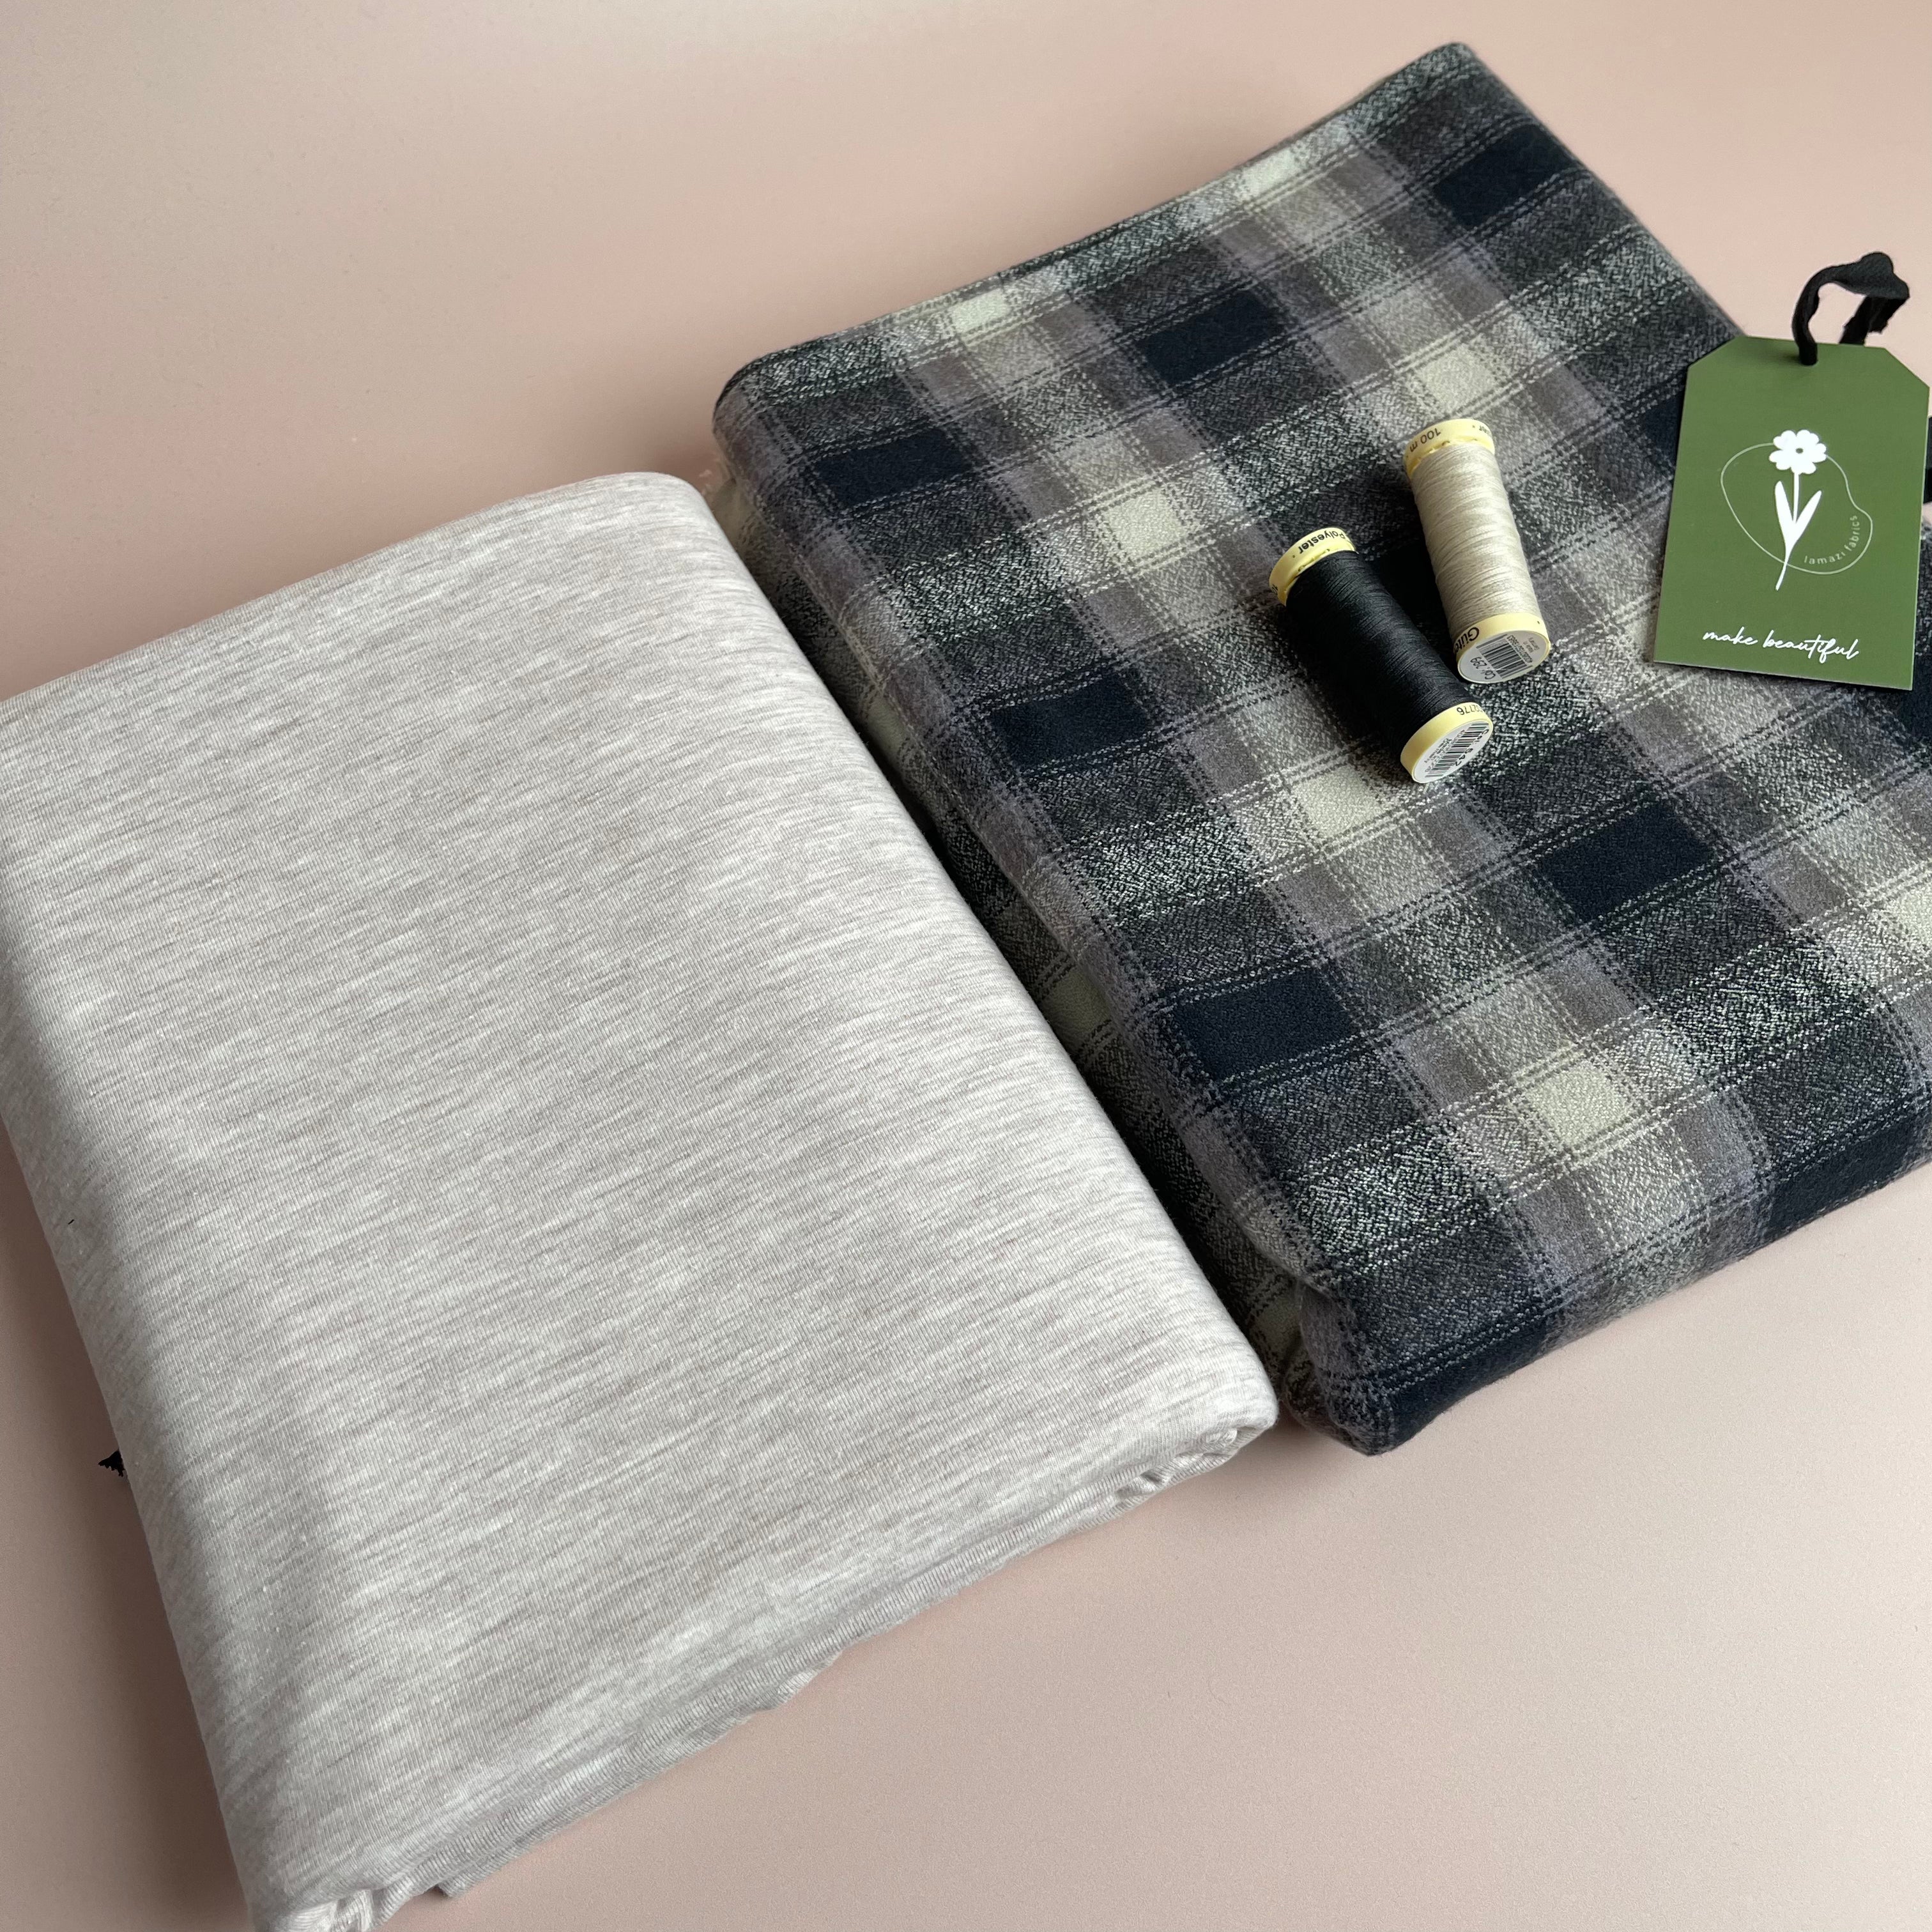 Limited Edition - Luxury Pyjama Kit with Grey Check Cotton Flannel